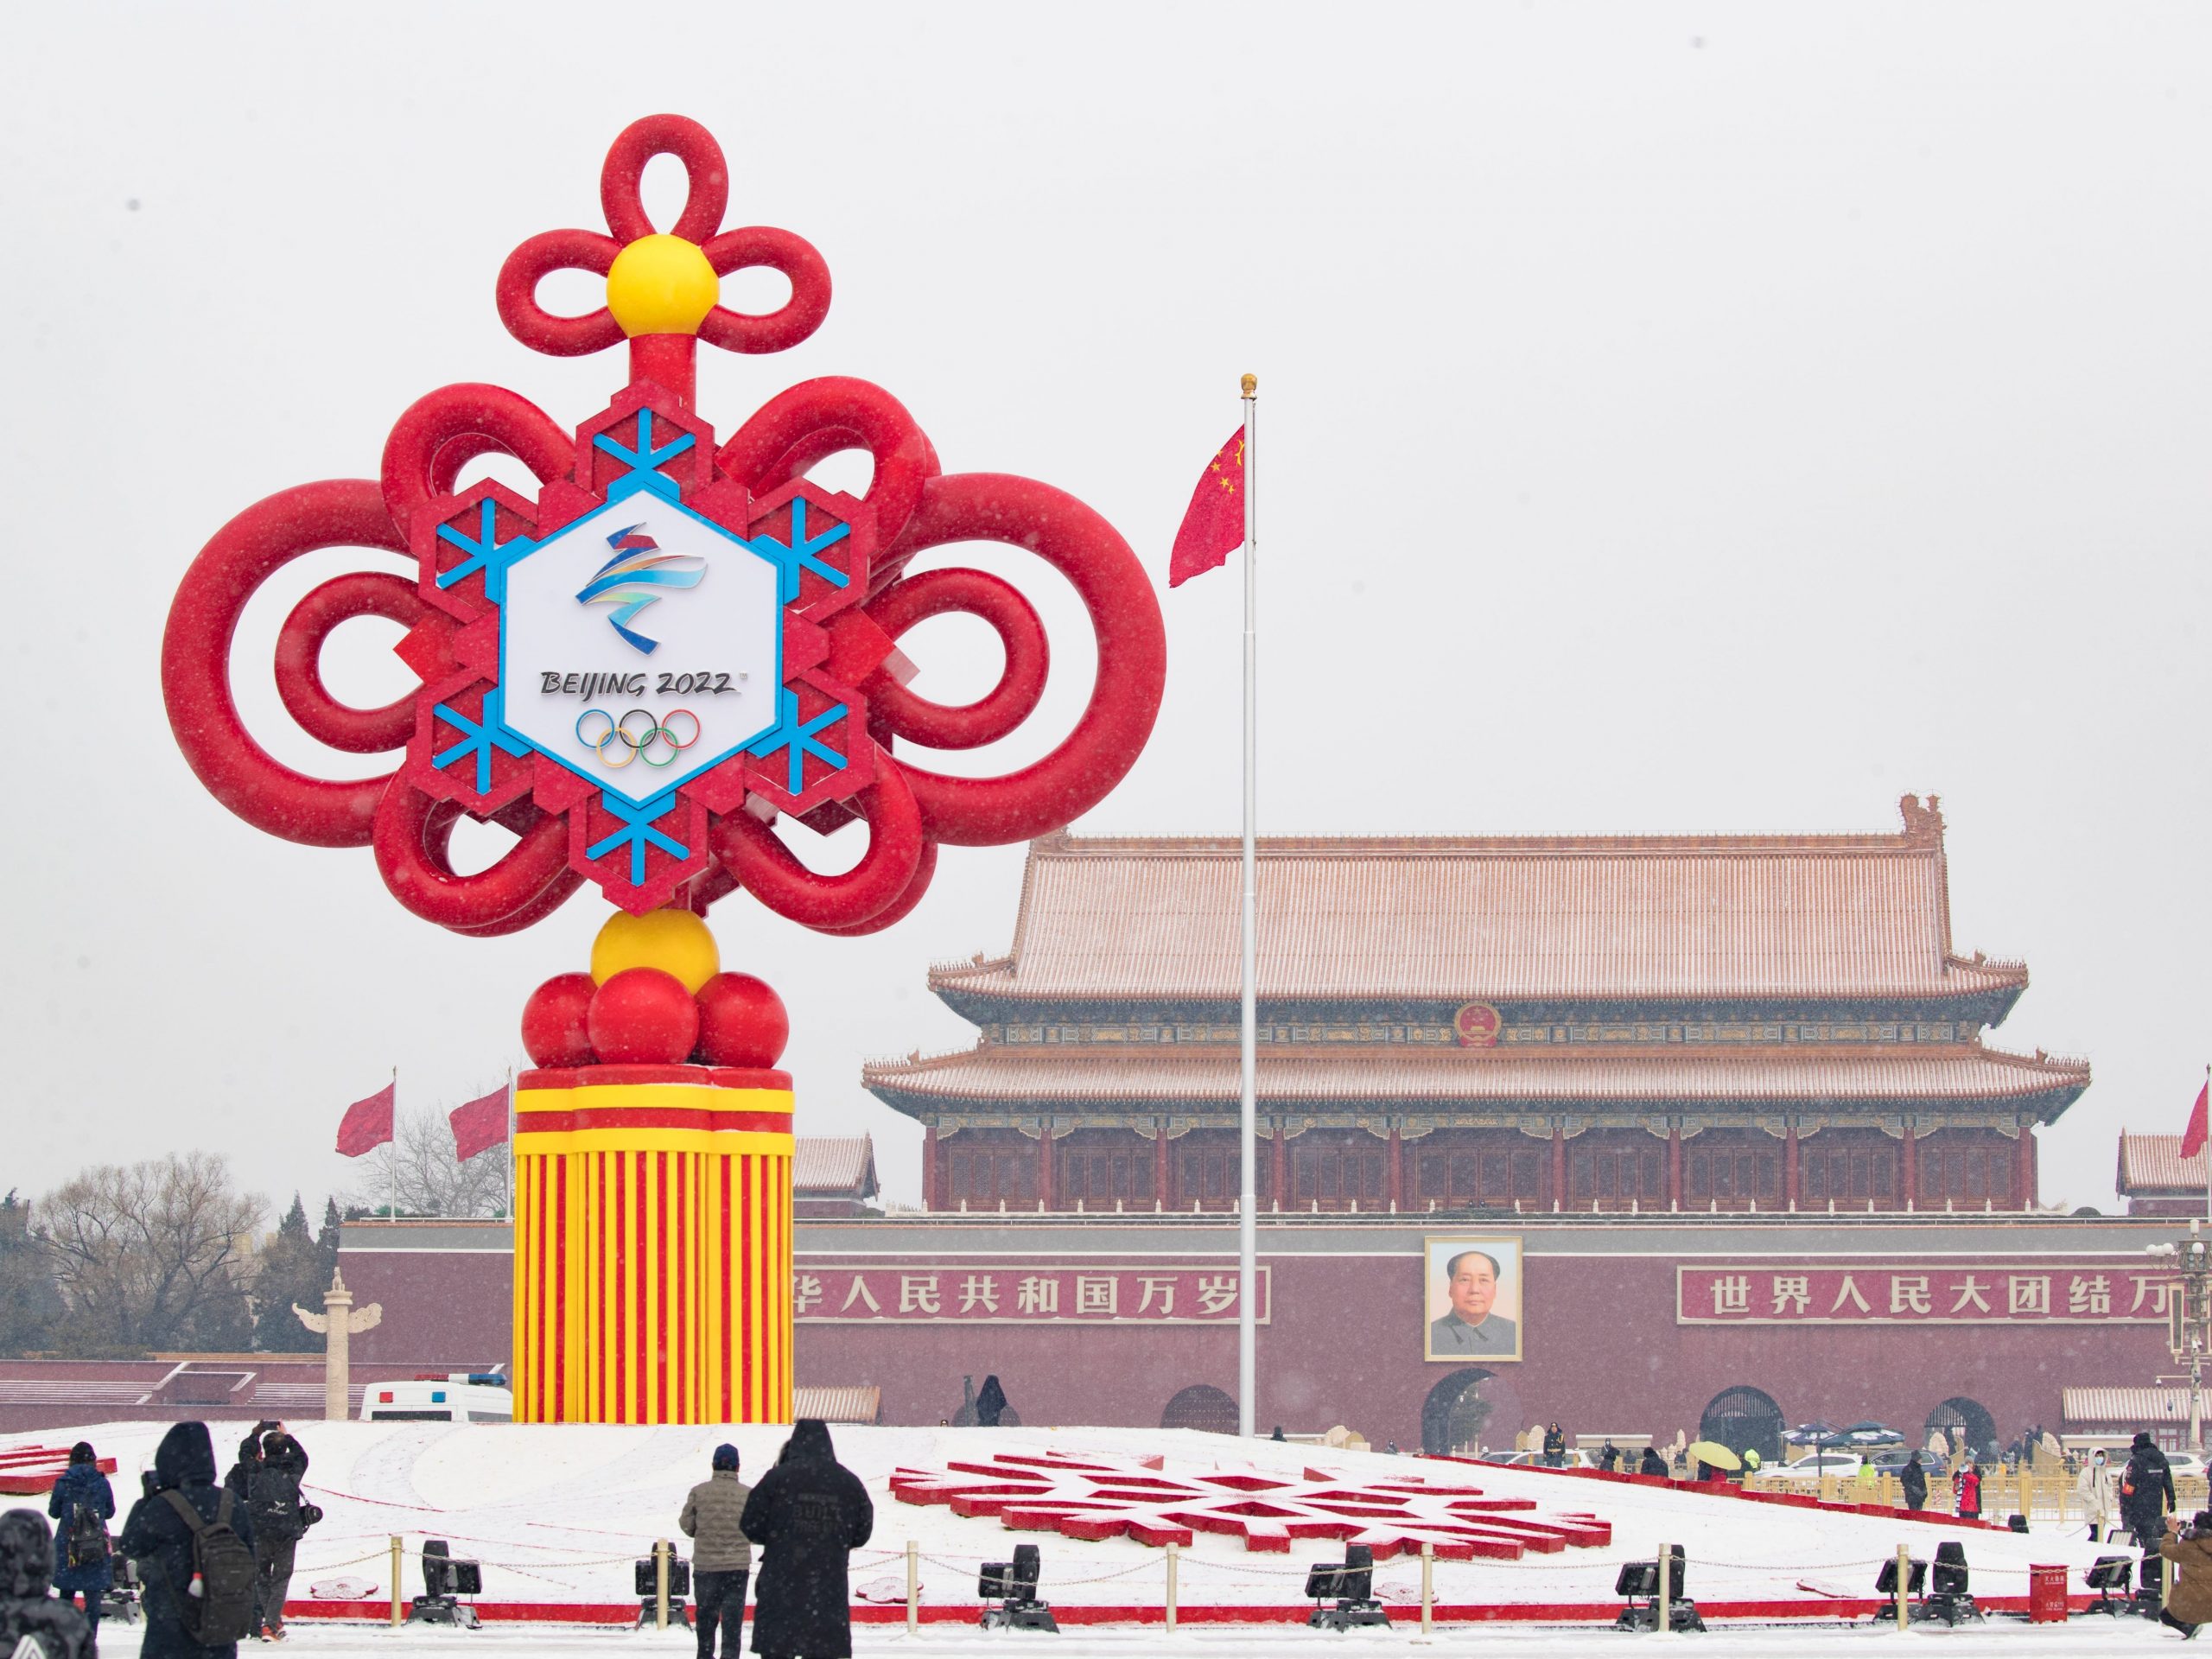 Winter Olympics-themed Chinese knot is seen at Tian'anmen Square on a snowy day on January 20, 2022 in Beijing, China.